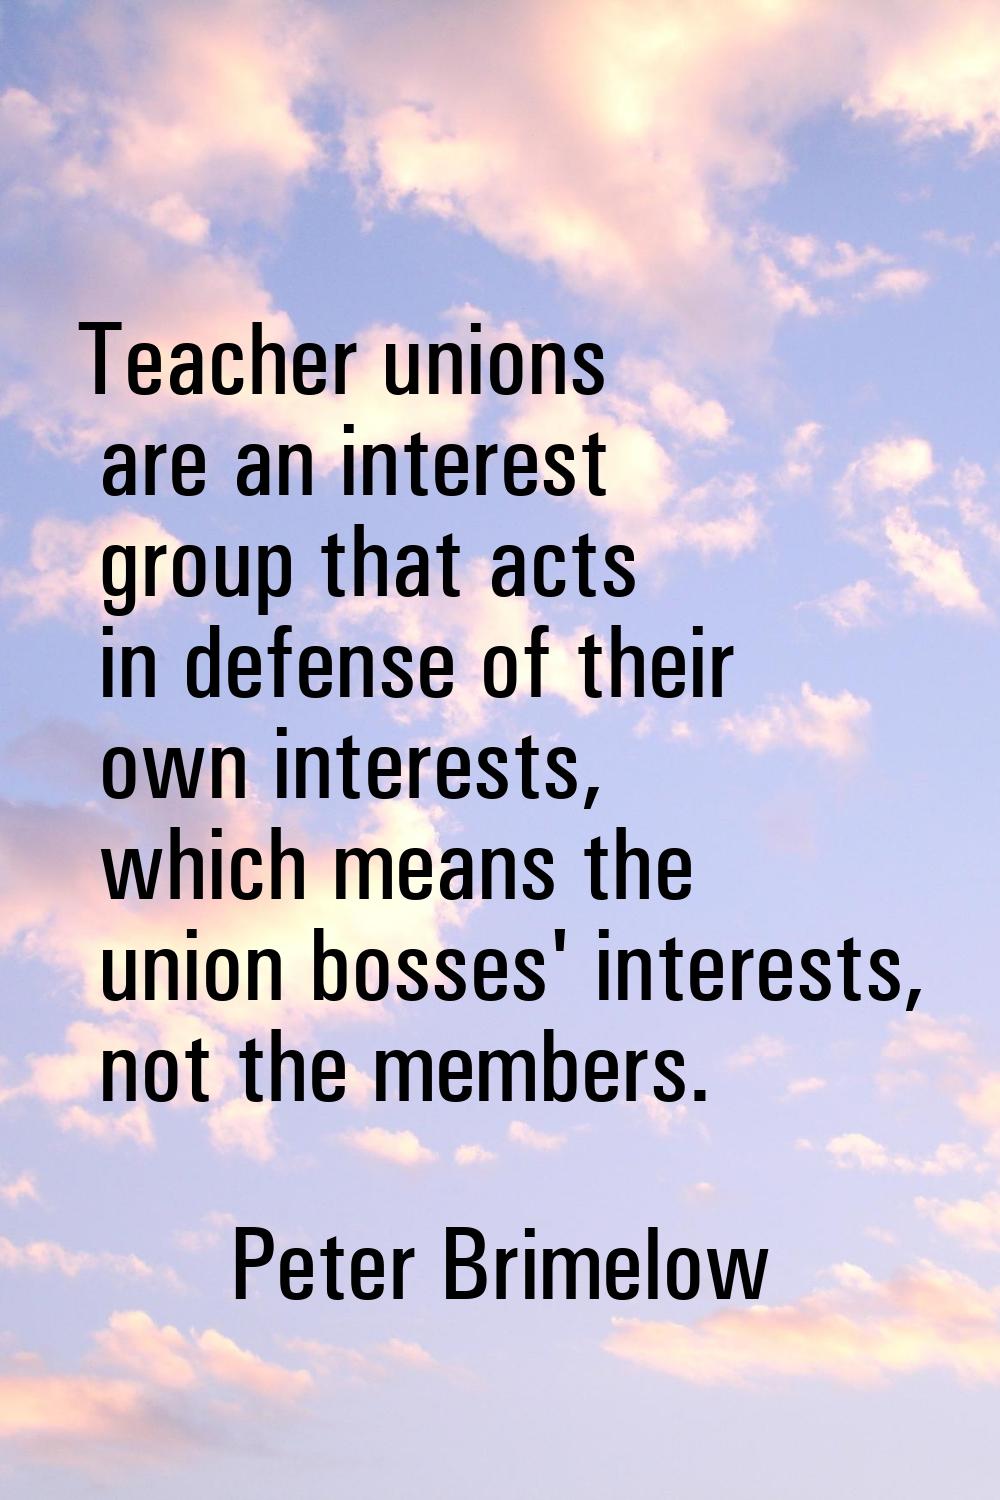 Teacher unions are an interest group that acts in defense of their own interests, which means the u